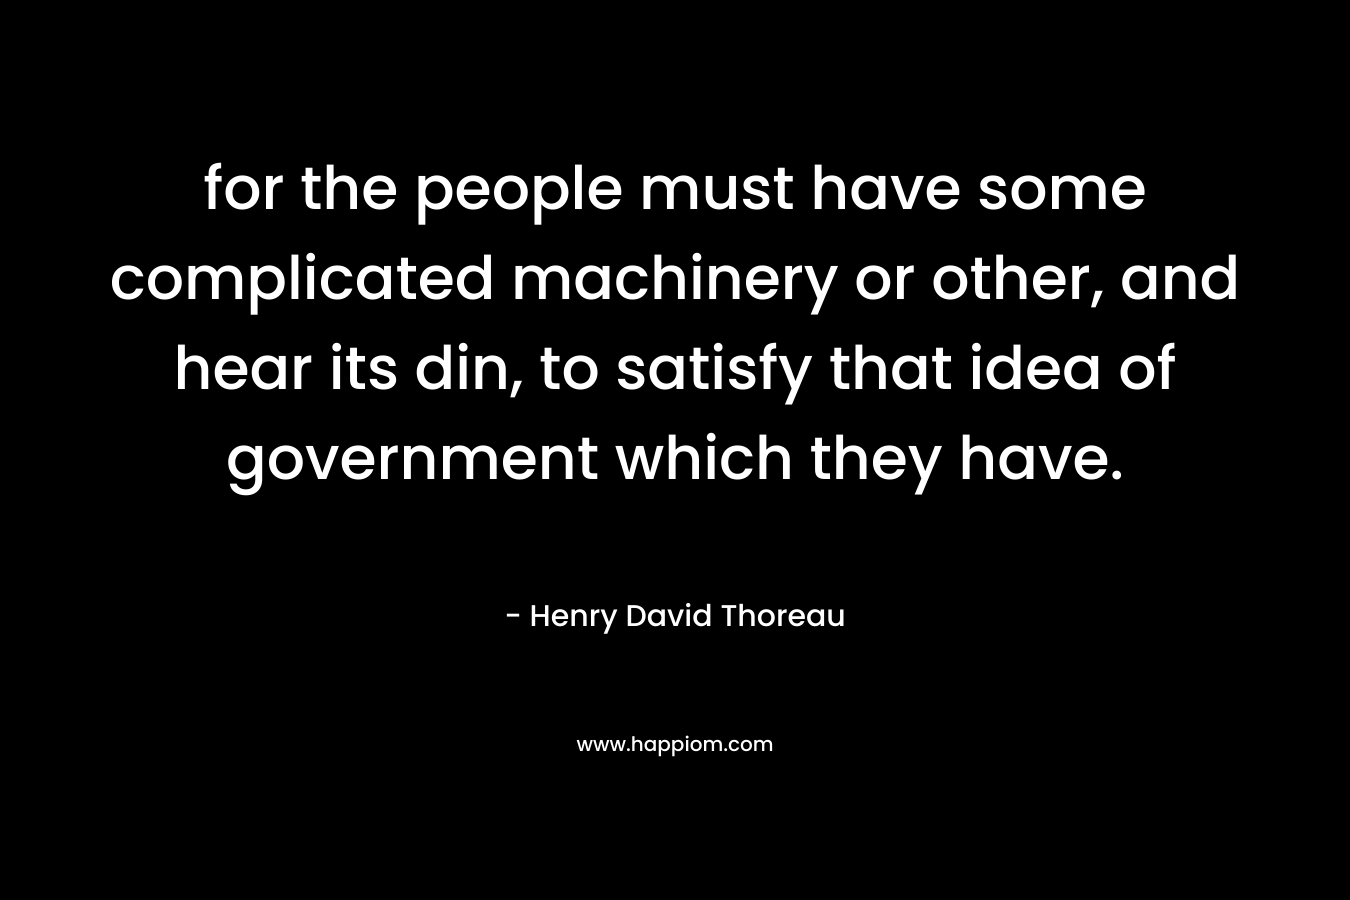 for the people must have some complicated machinery or other, and hear its din, to satisfy that idea of government which they have. – Henry David Thoreau